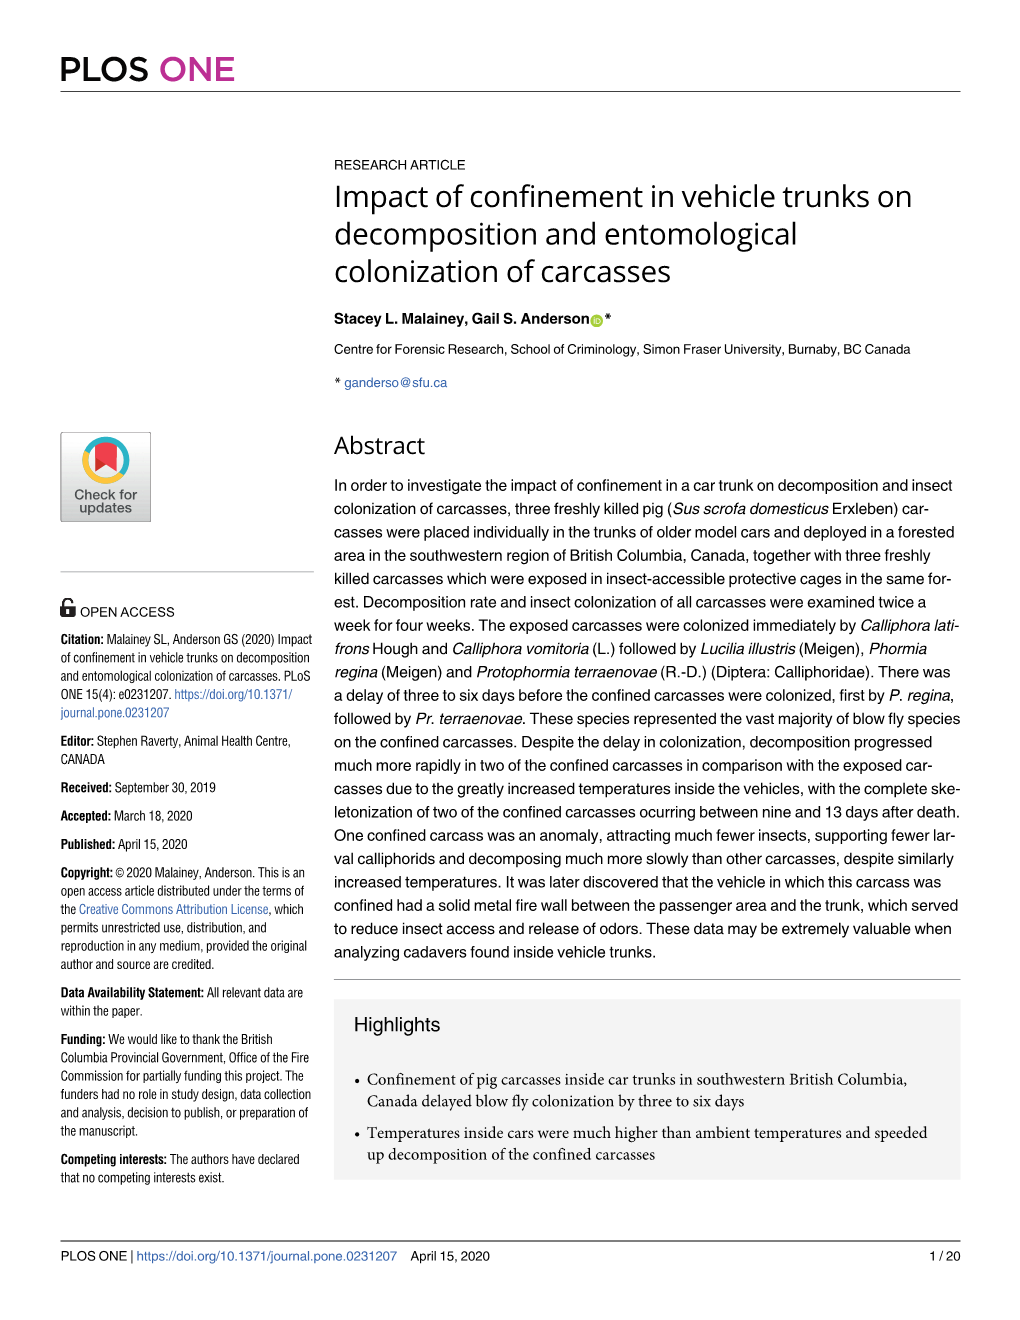 Impact of Confinement in Vehicle Trunks on Decomposition and Entomological Colonization of Carcasses